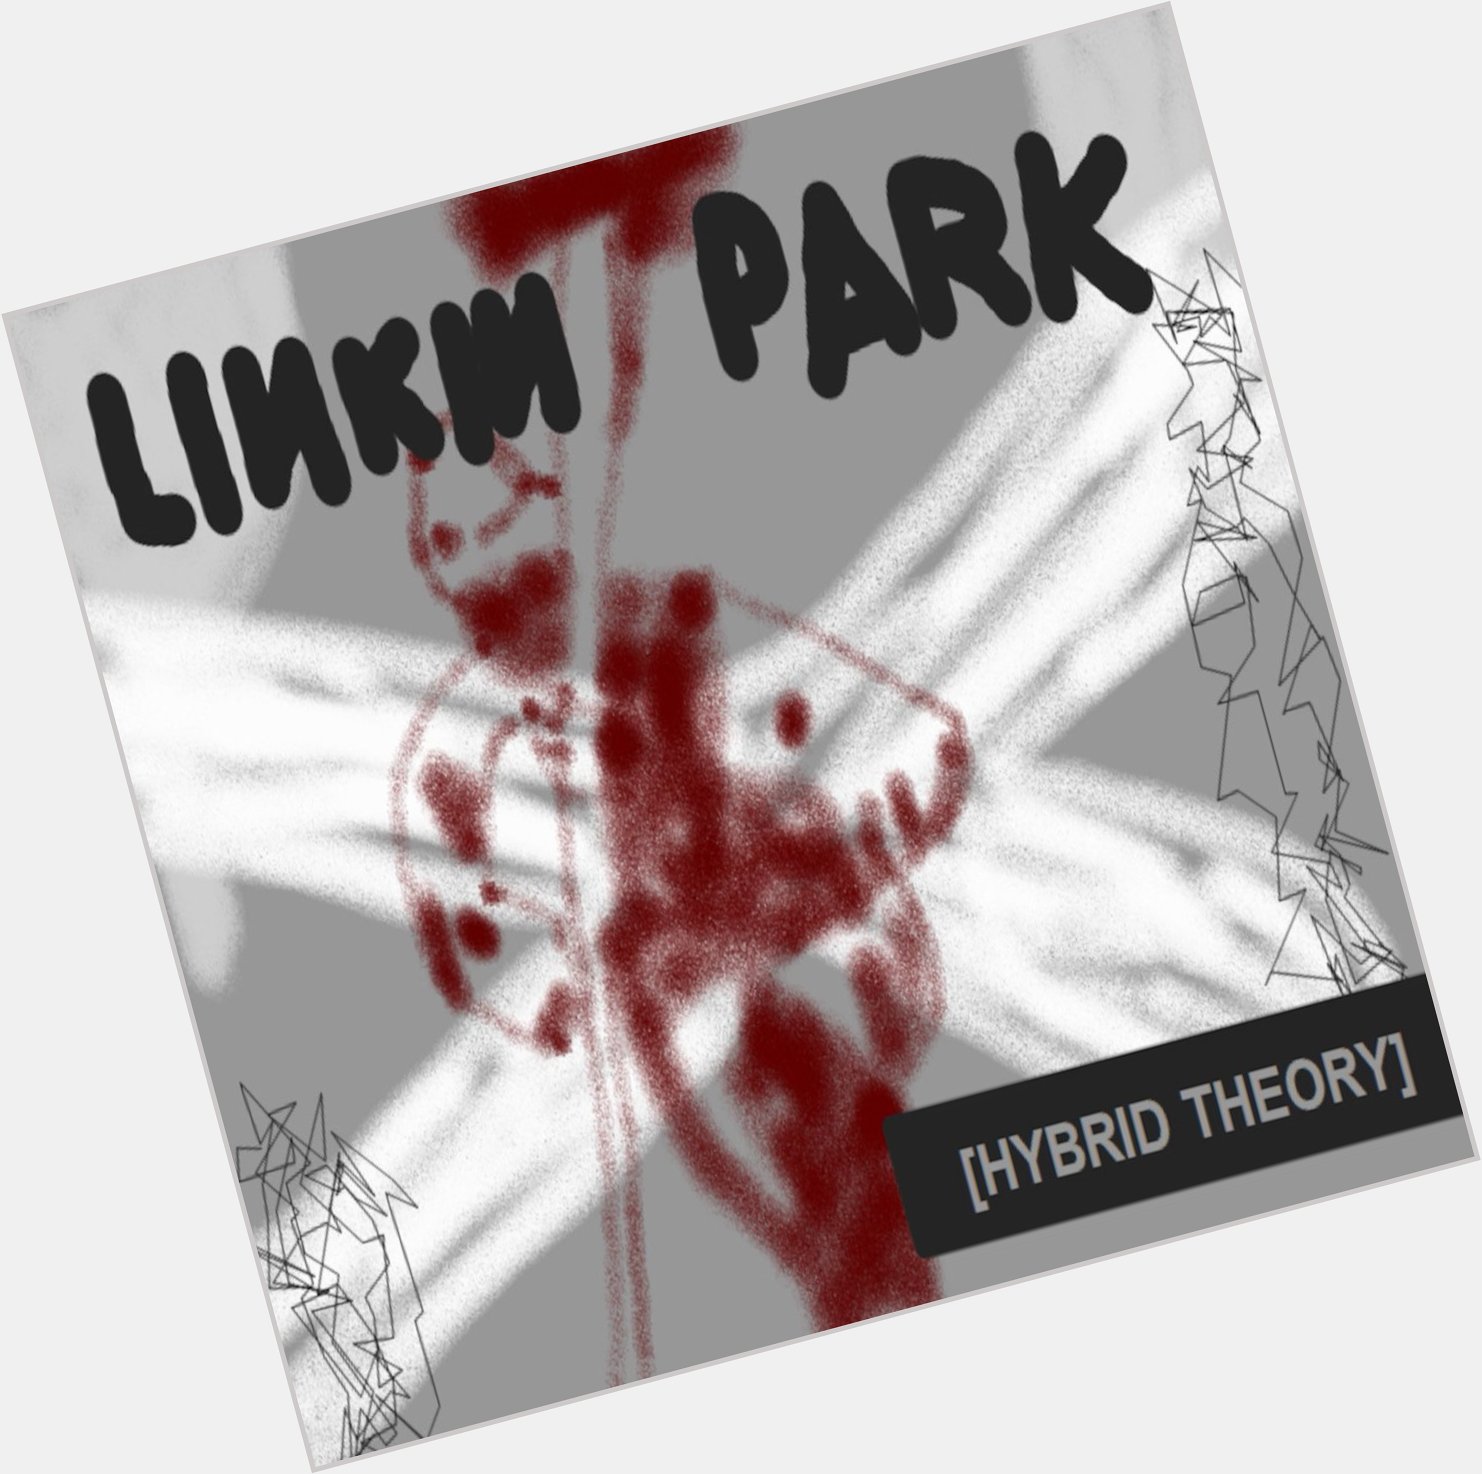 Happy birthday Chester Bennington!
He would have been 45 today. - Hybrid Theory (2000) 